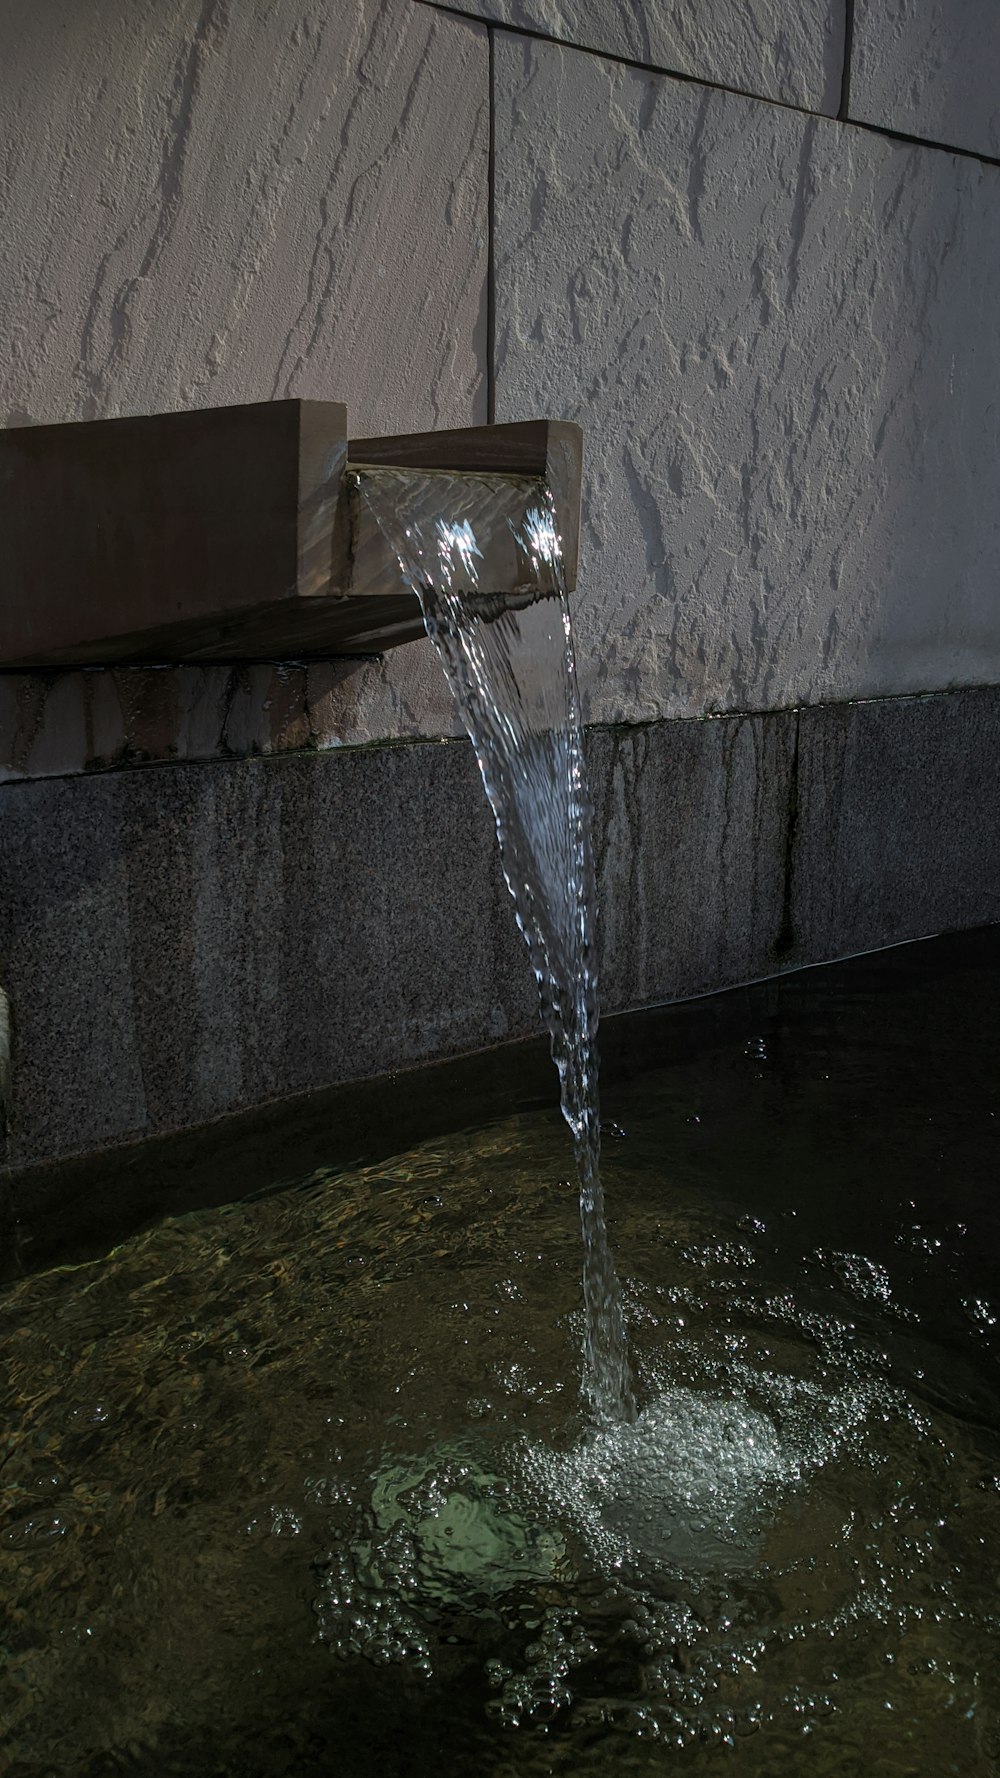 a water fountain spewing water into a pool of water